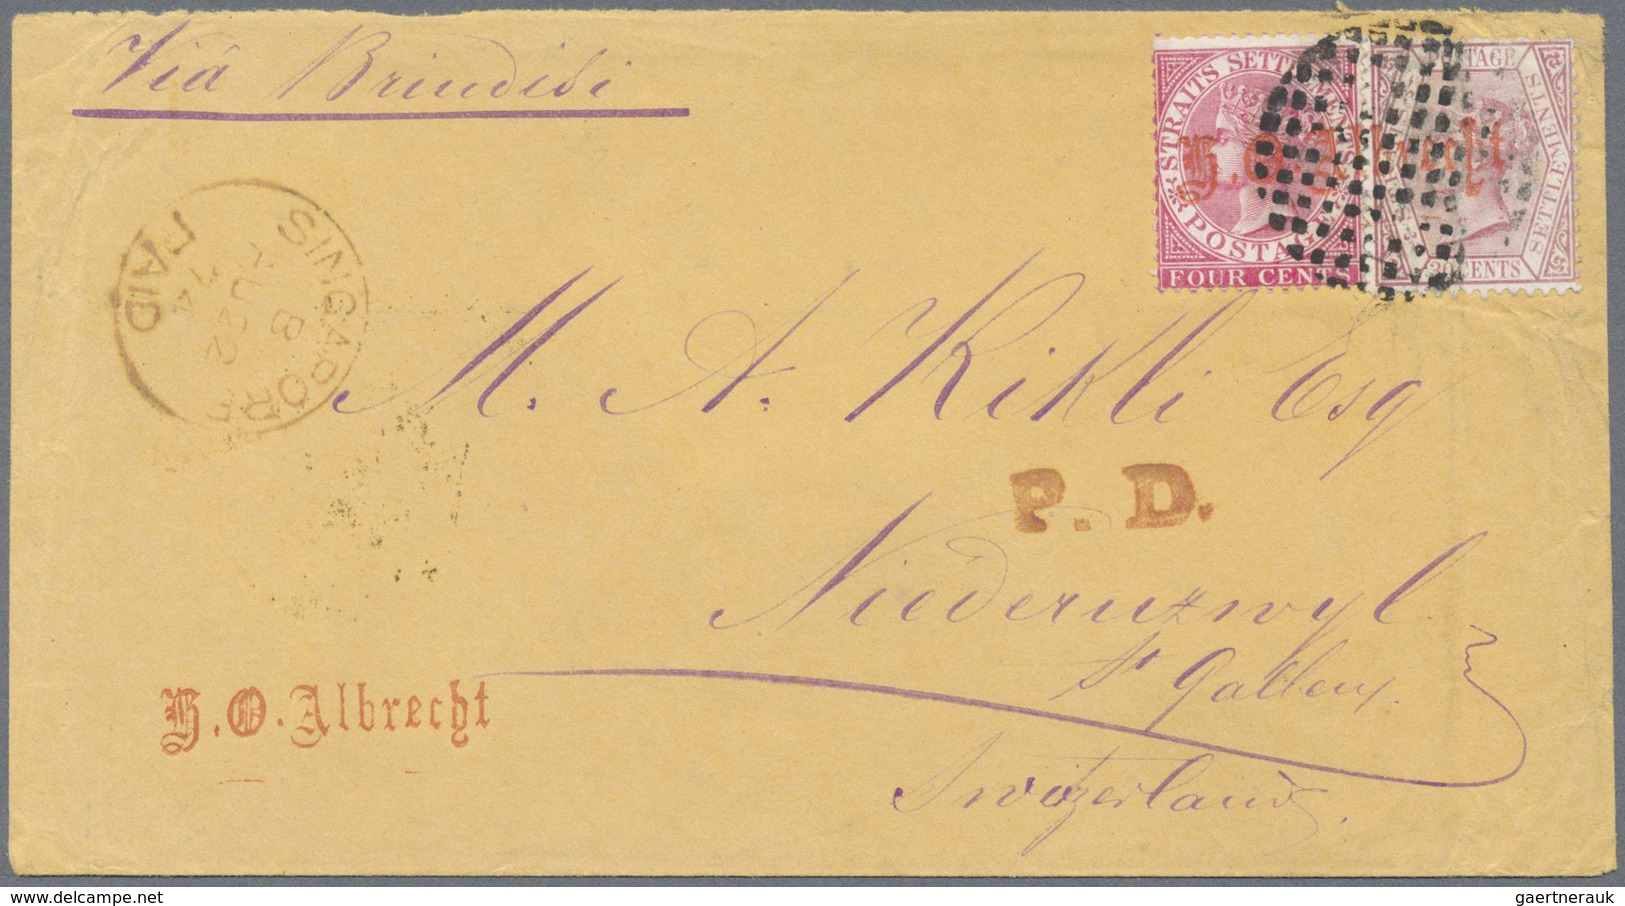 Br Singapur: 1874 Cover From Singapore To Niederuzwyl, Switzerland 'Via Brindisi', Franked By Straits S - Singapore (...-1959)